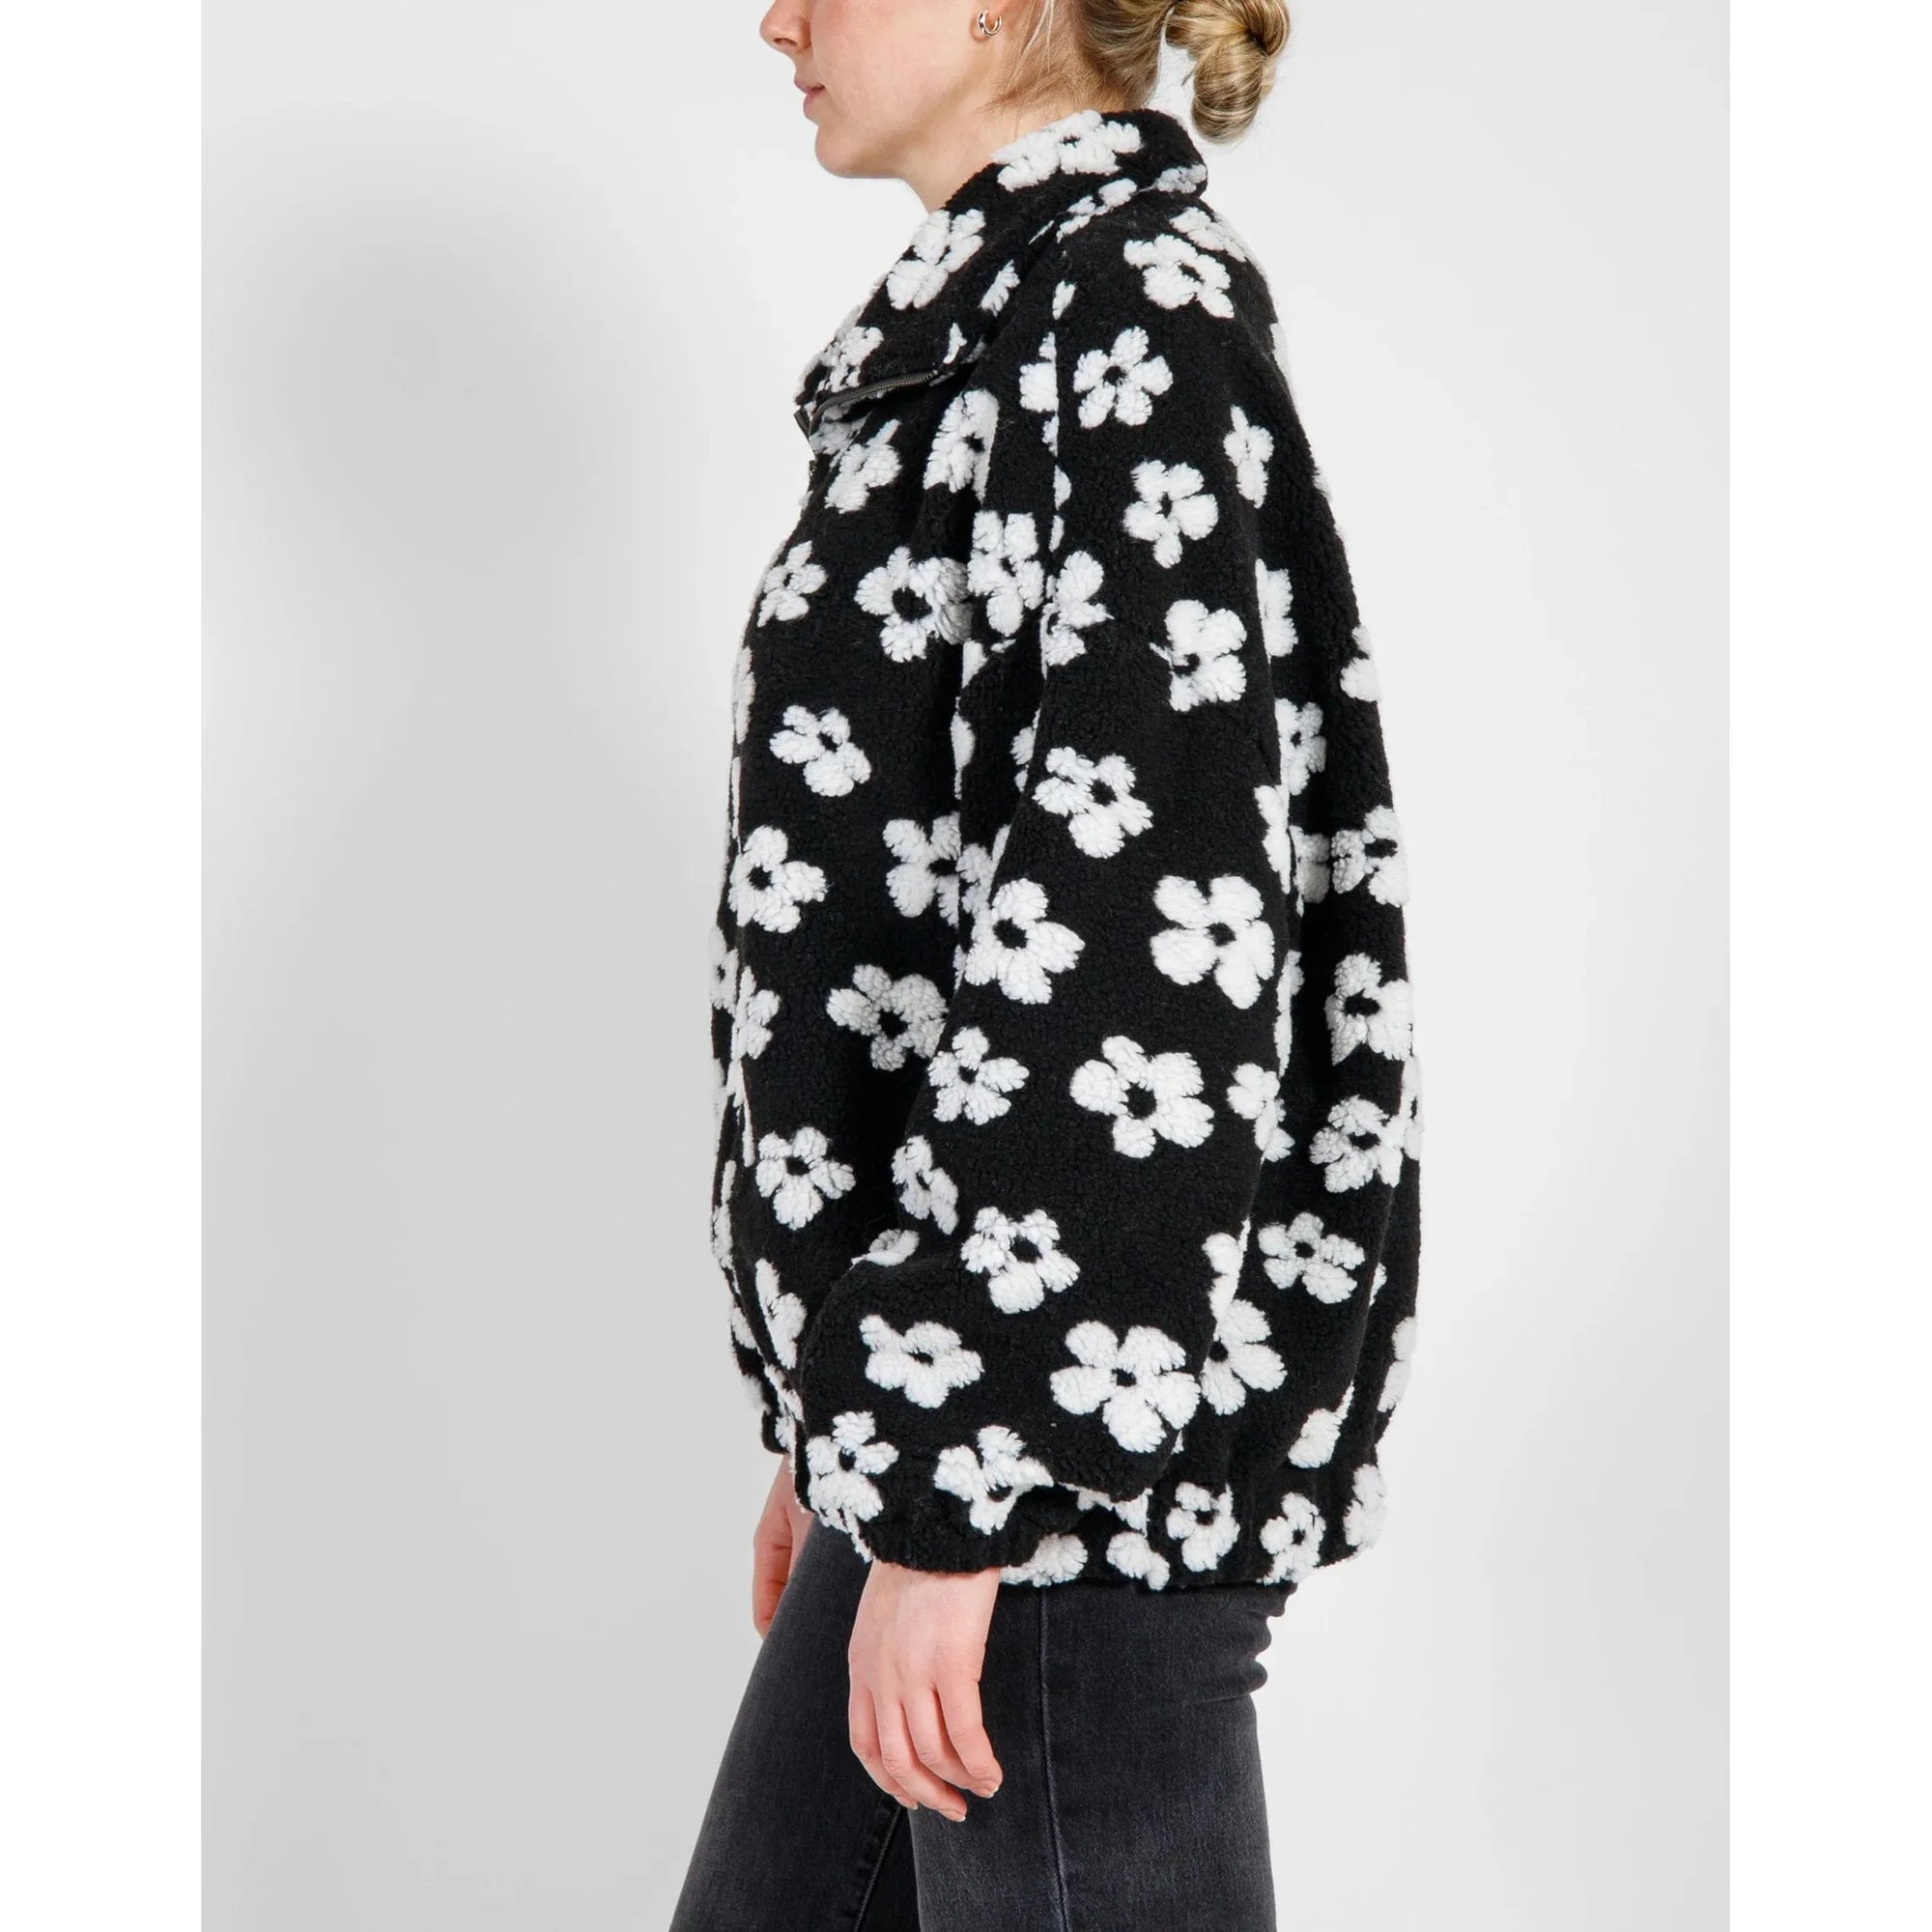 Brunette the Label Brunette the Label all Over Daisy Zip Sherpa Jacket